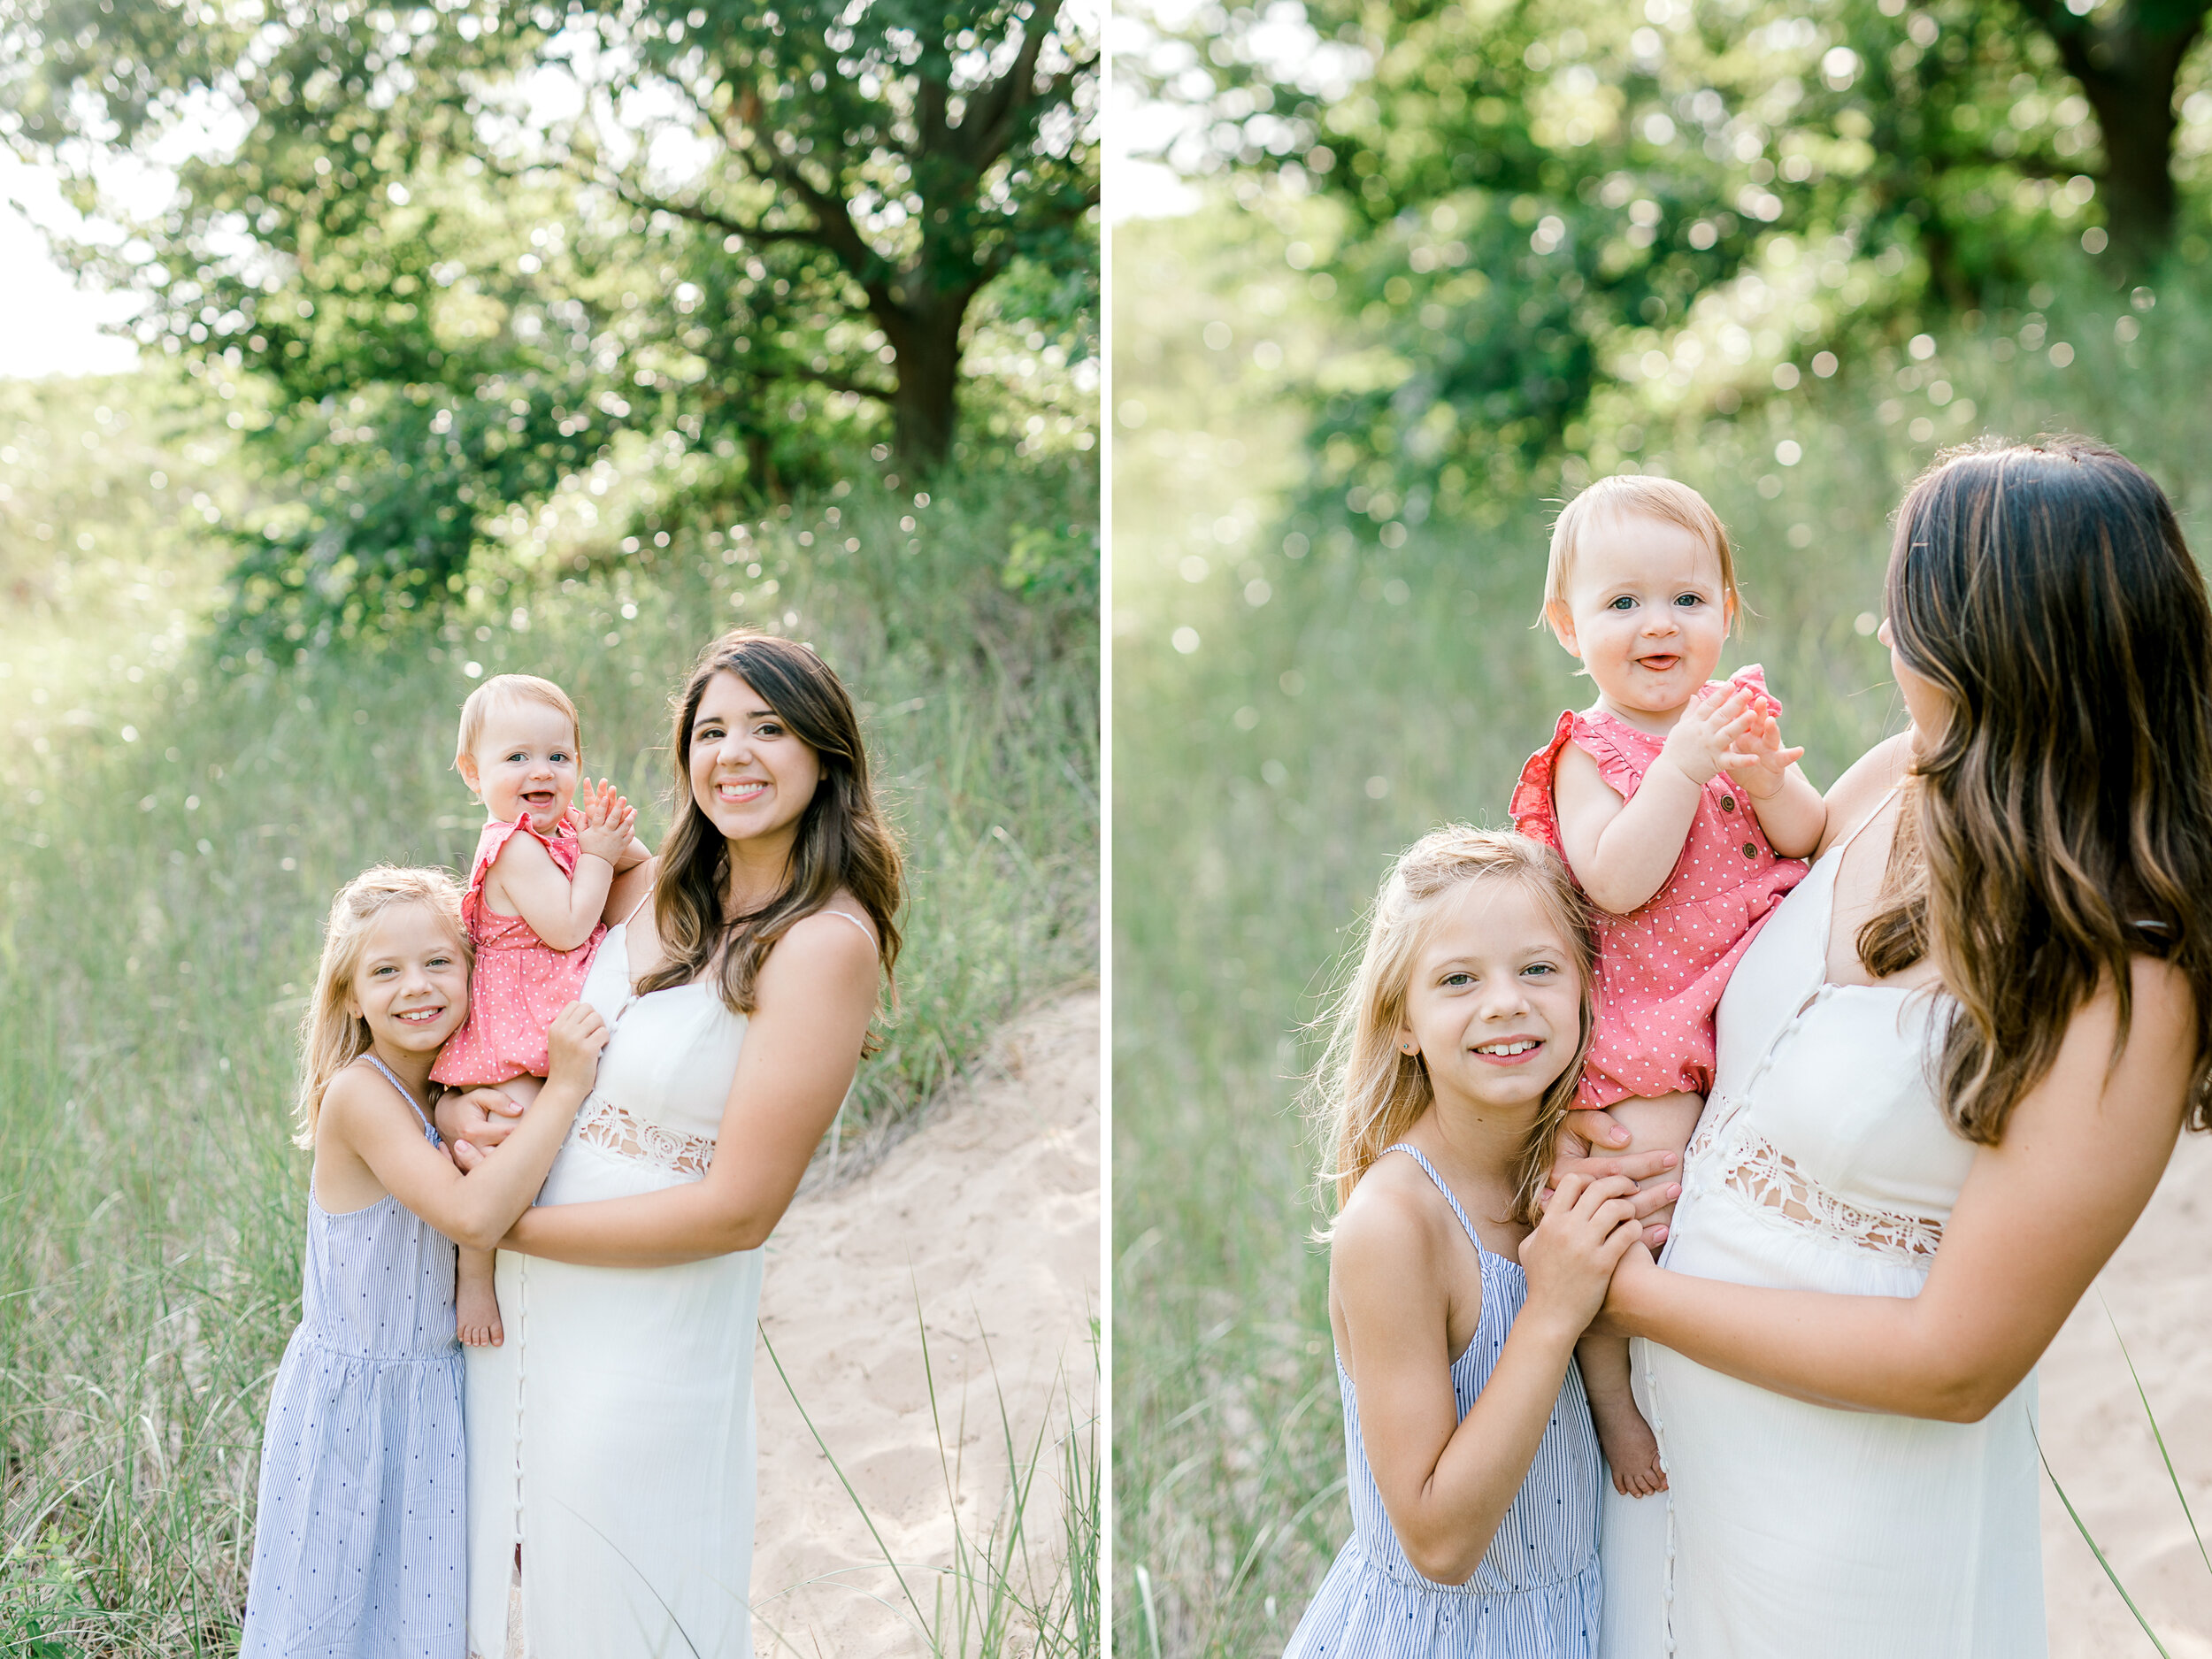 Lifestyle Family Session on Lake Michigan | Grand Rapids Family Photographer | Light &amp; Airy Photographer